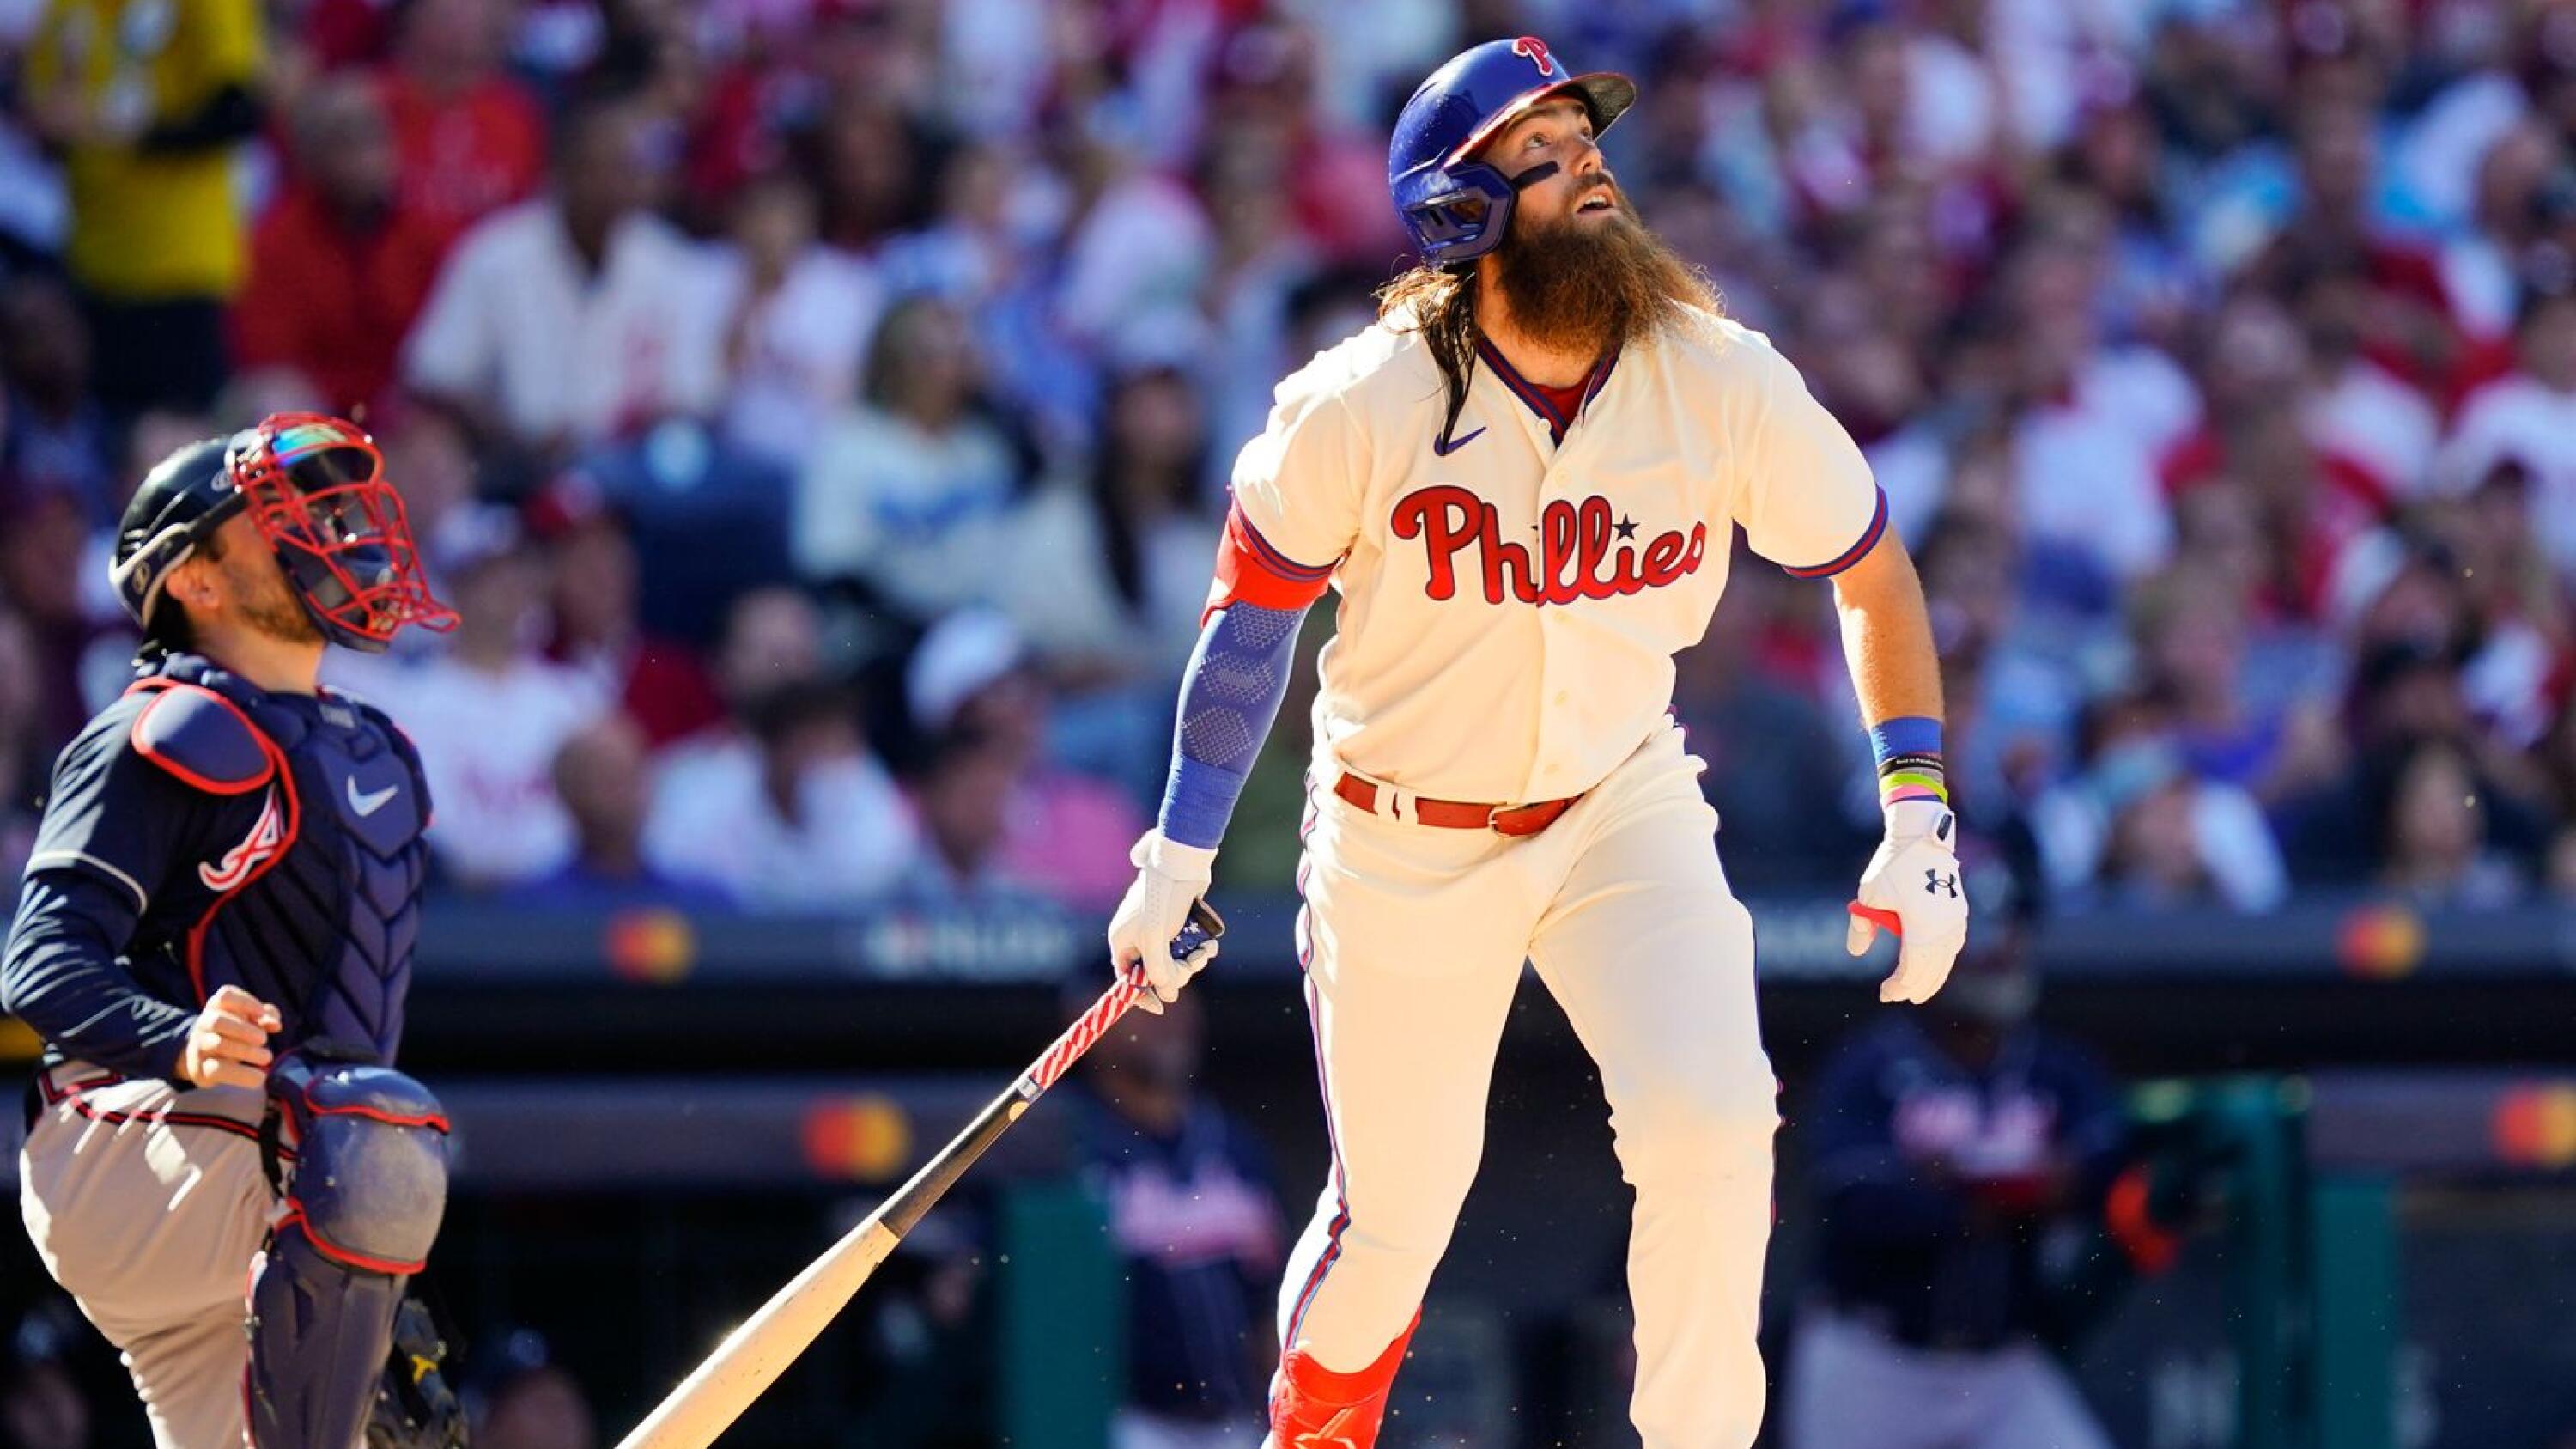 Harper, Phillies hold off Dodgers 2-1 to avoid sweep